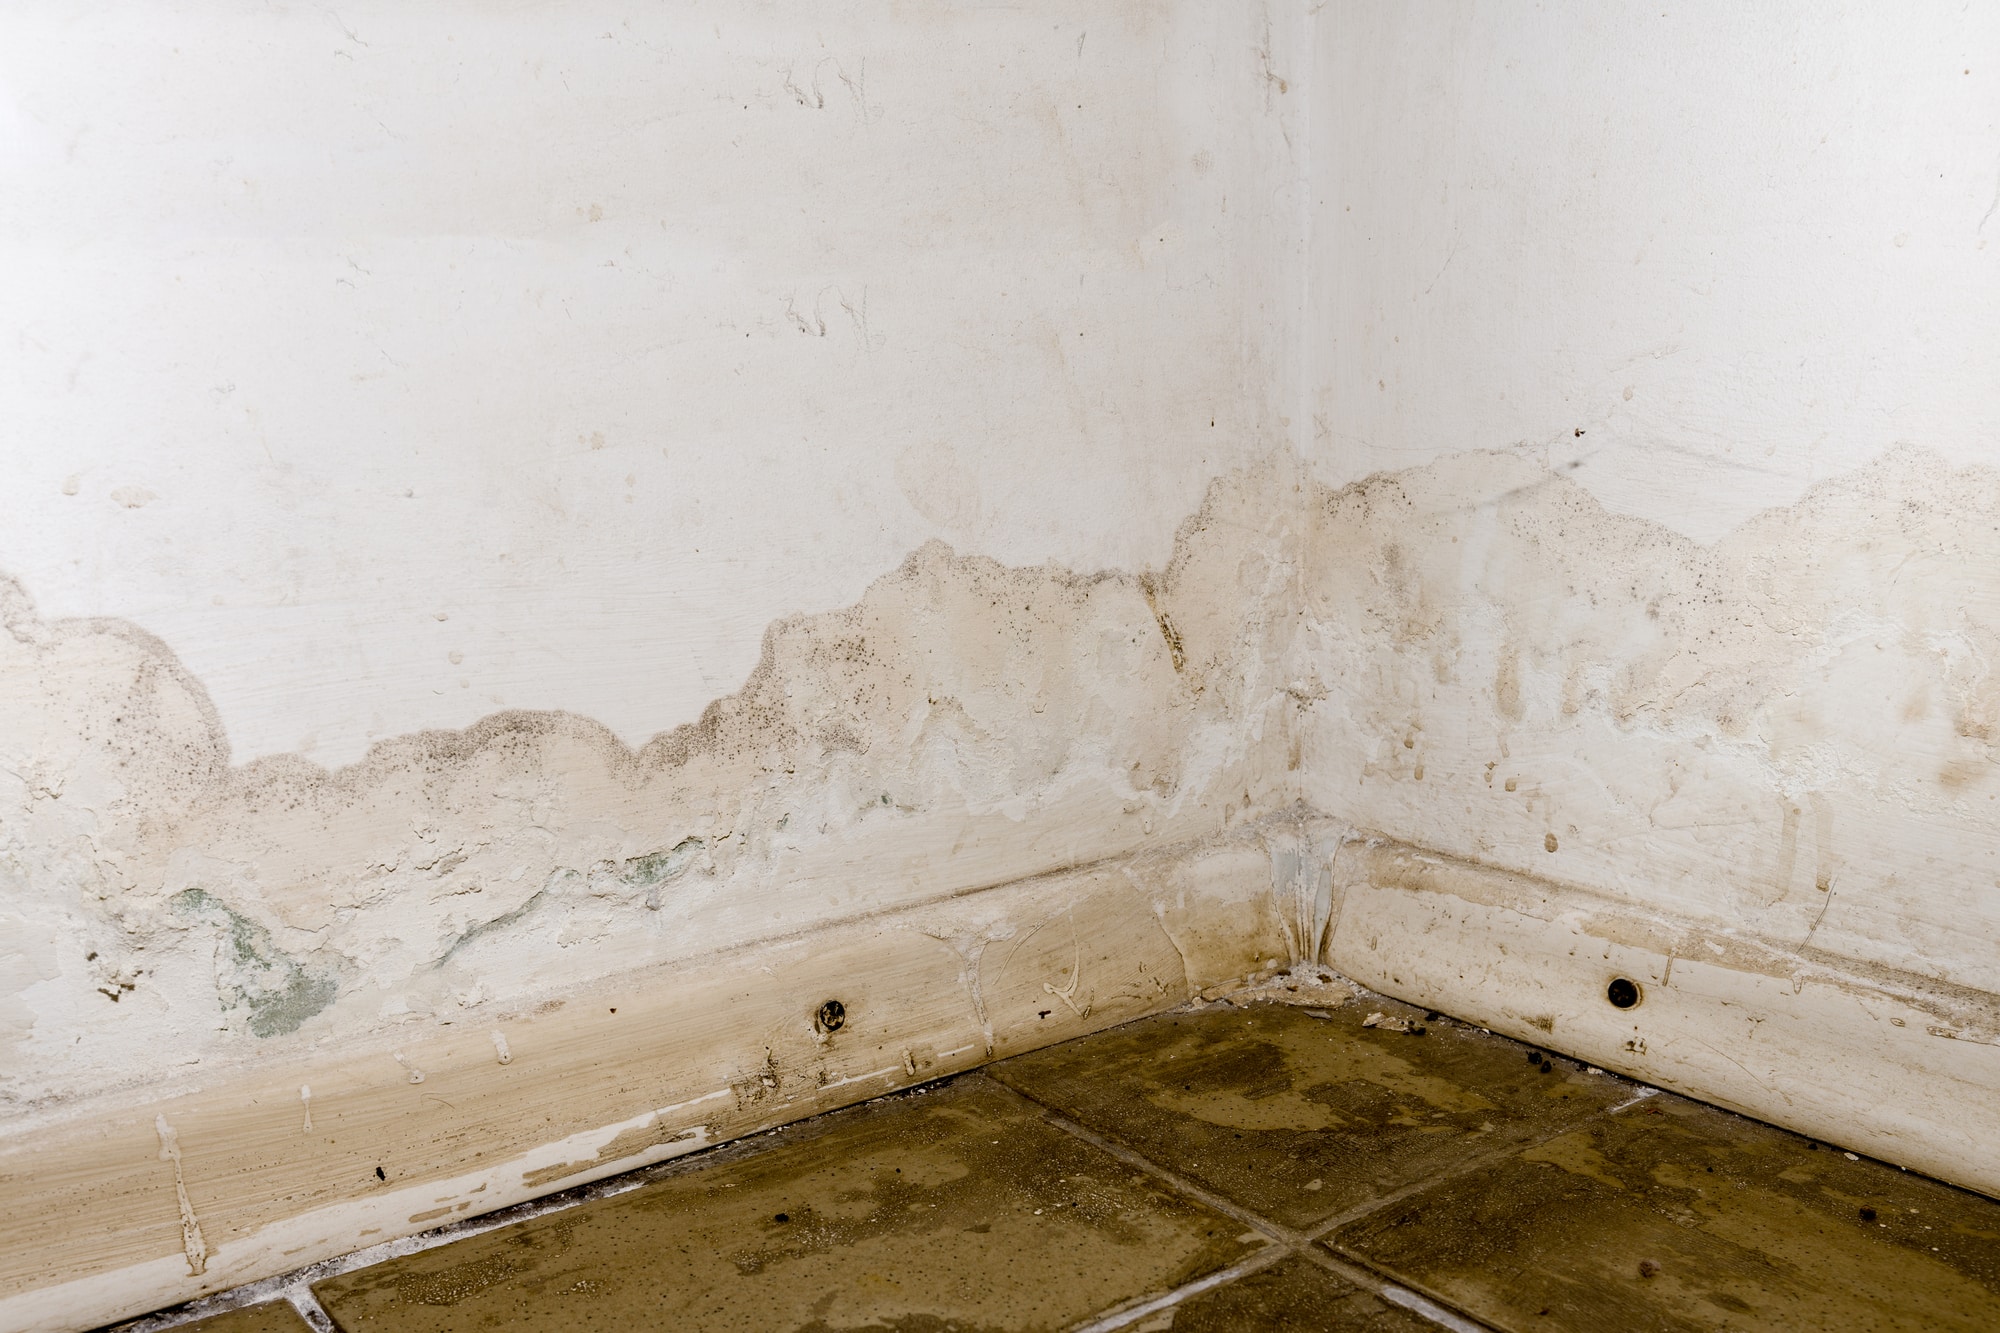 Water damage on baseboards and drywall